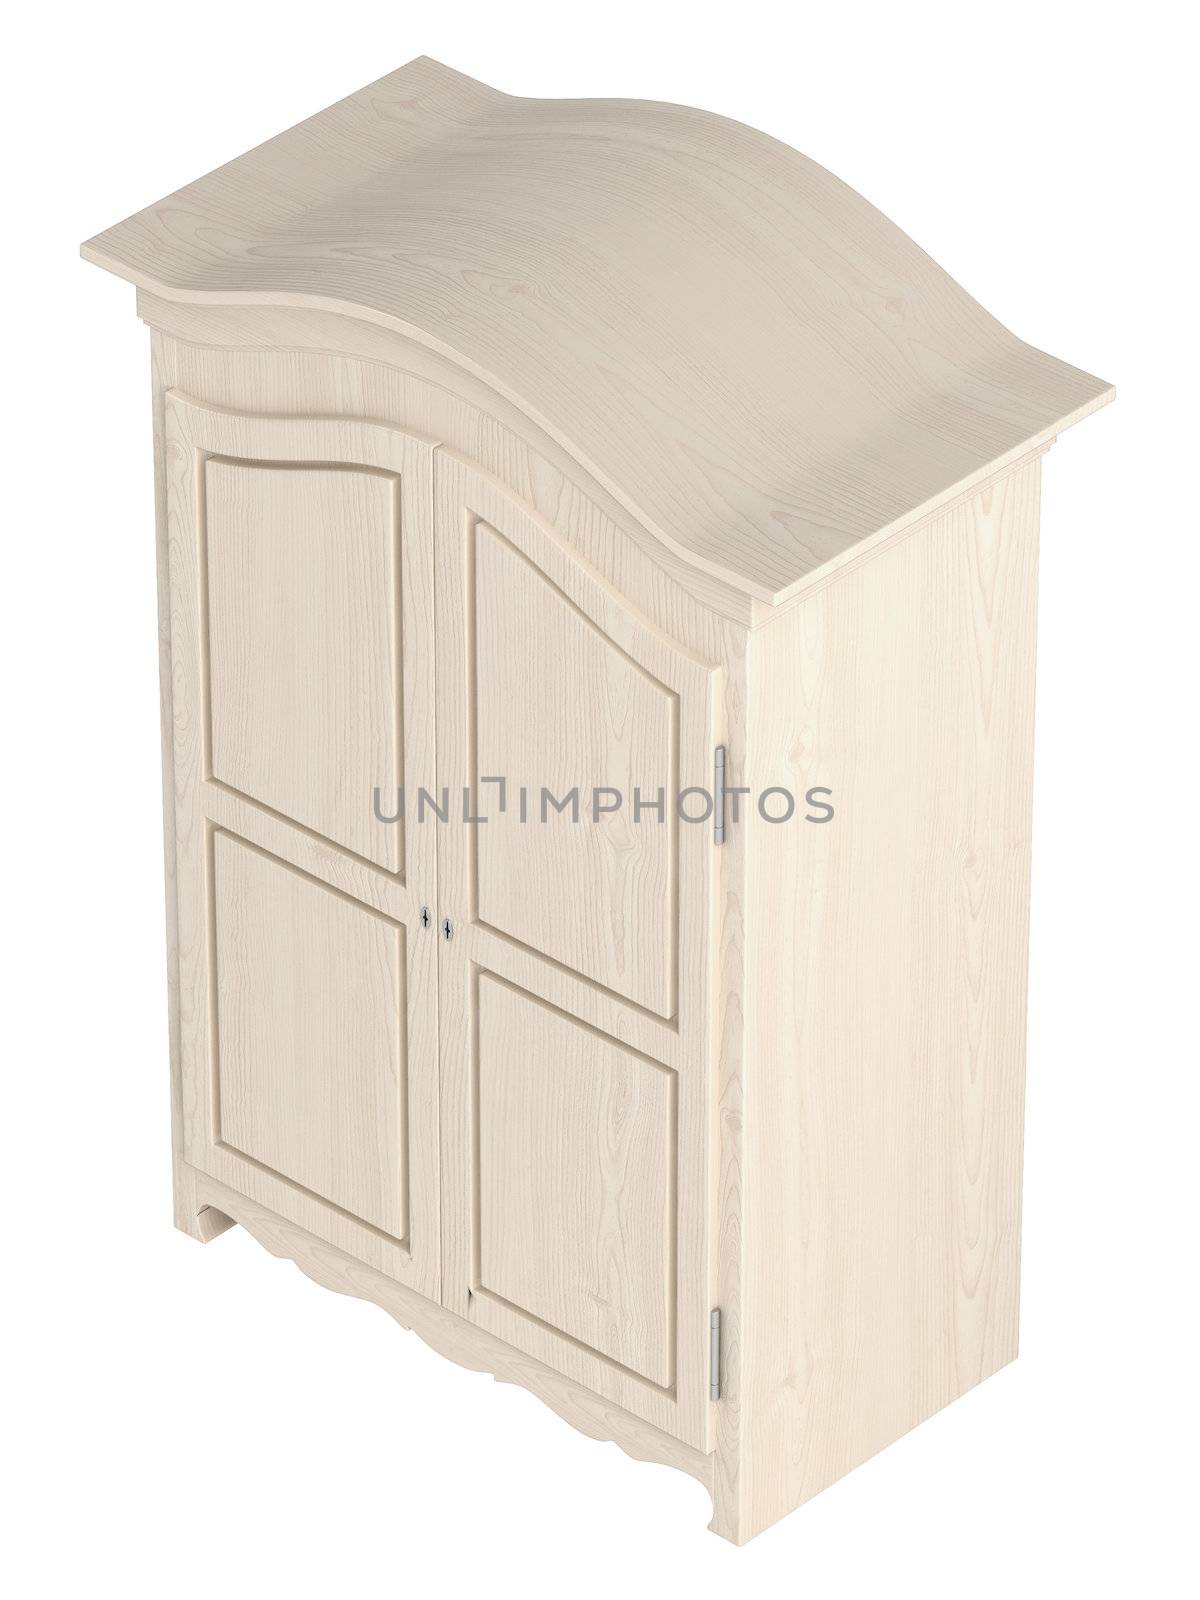 Rustic white painted wooden cupboard with a gable top isolated on white